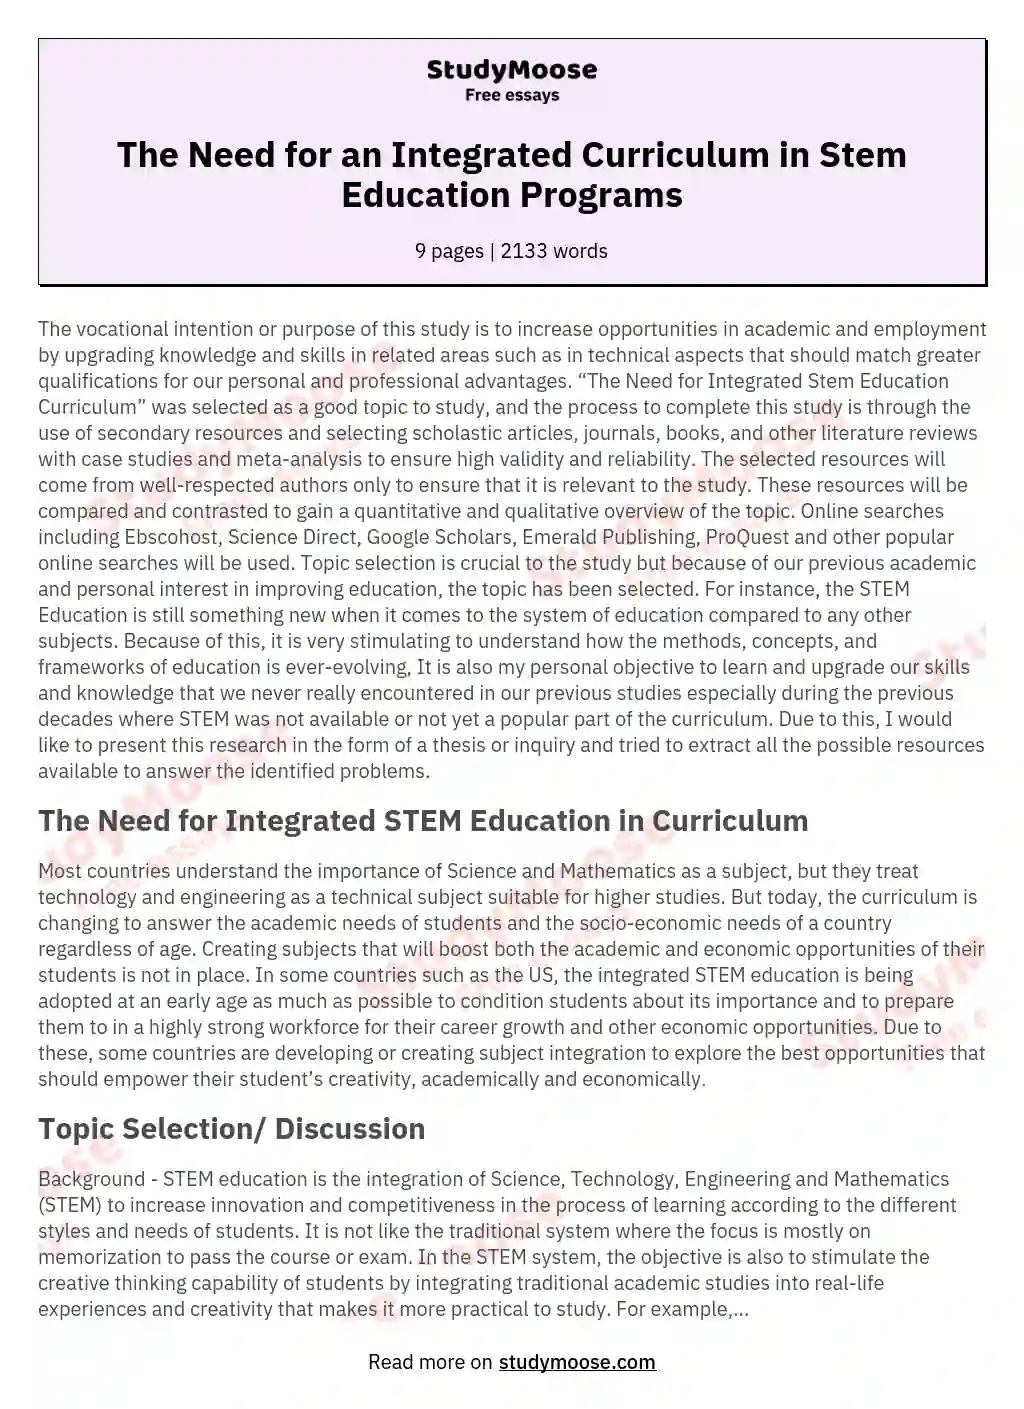 The Need for an Integrated Curriculum in Stem Education Programs essay